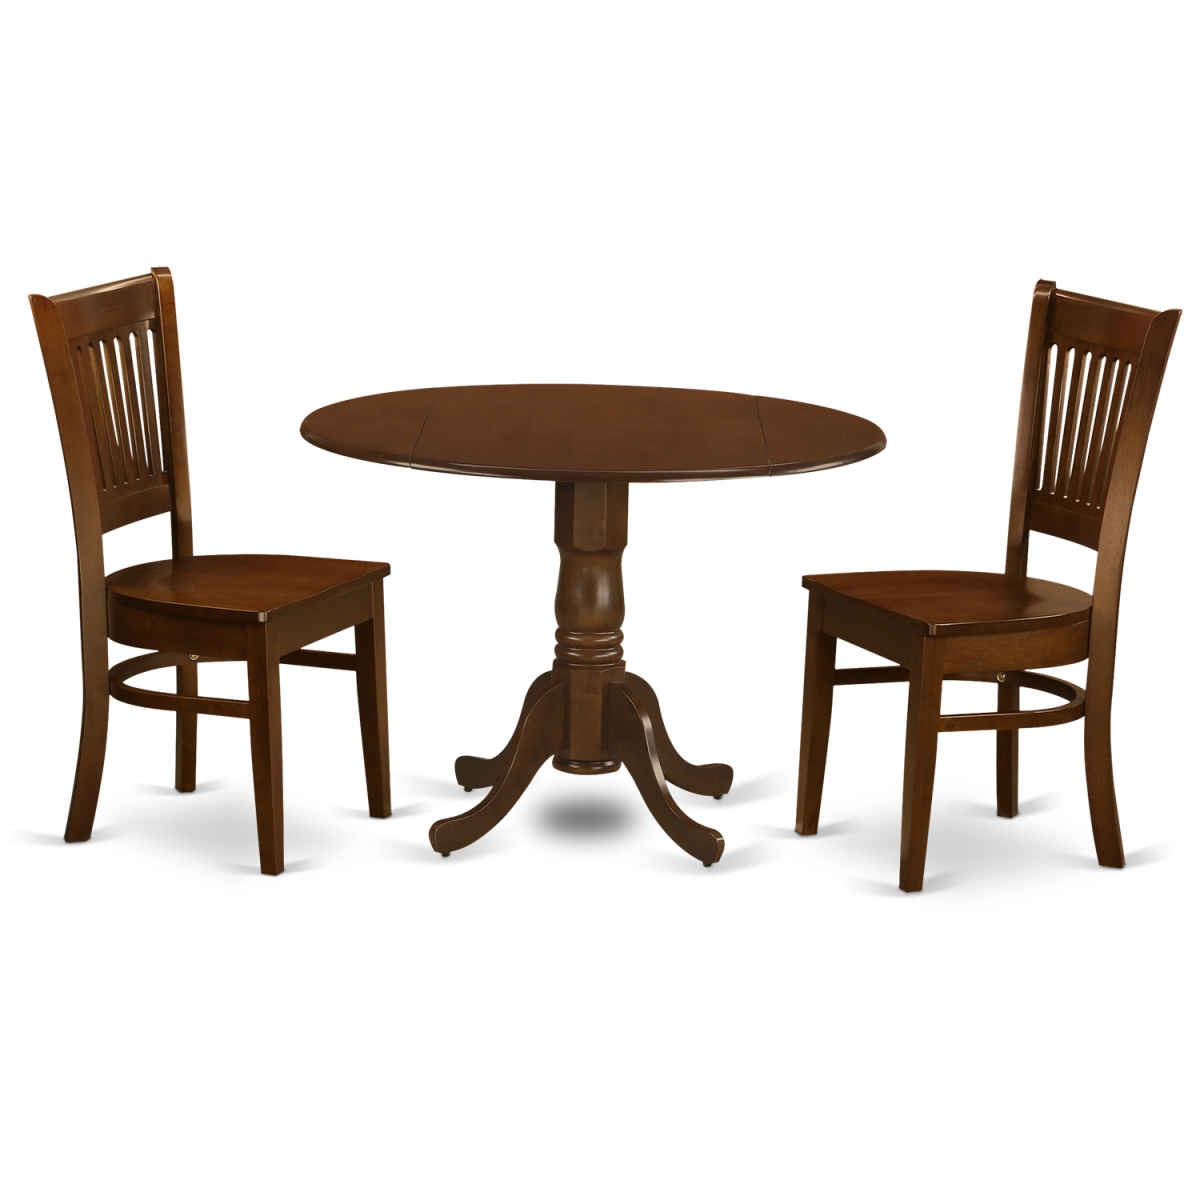 Picture of East West Furniture DLVA3-ESP-W Dublin Dining Table with 2 Drop - Leaf & Two Wood Seat Chairs, Espresso - 9 in. - 3 Piece